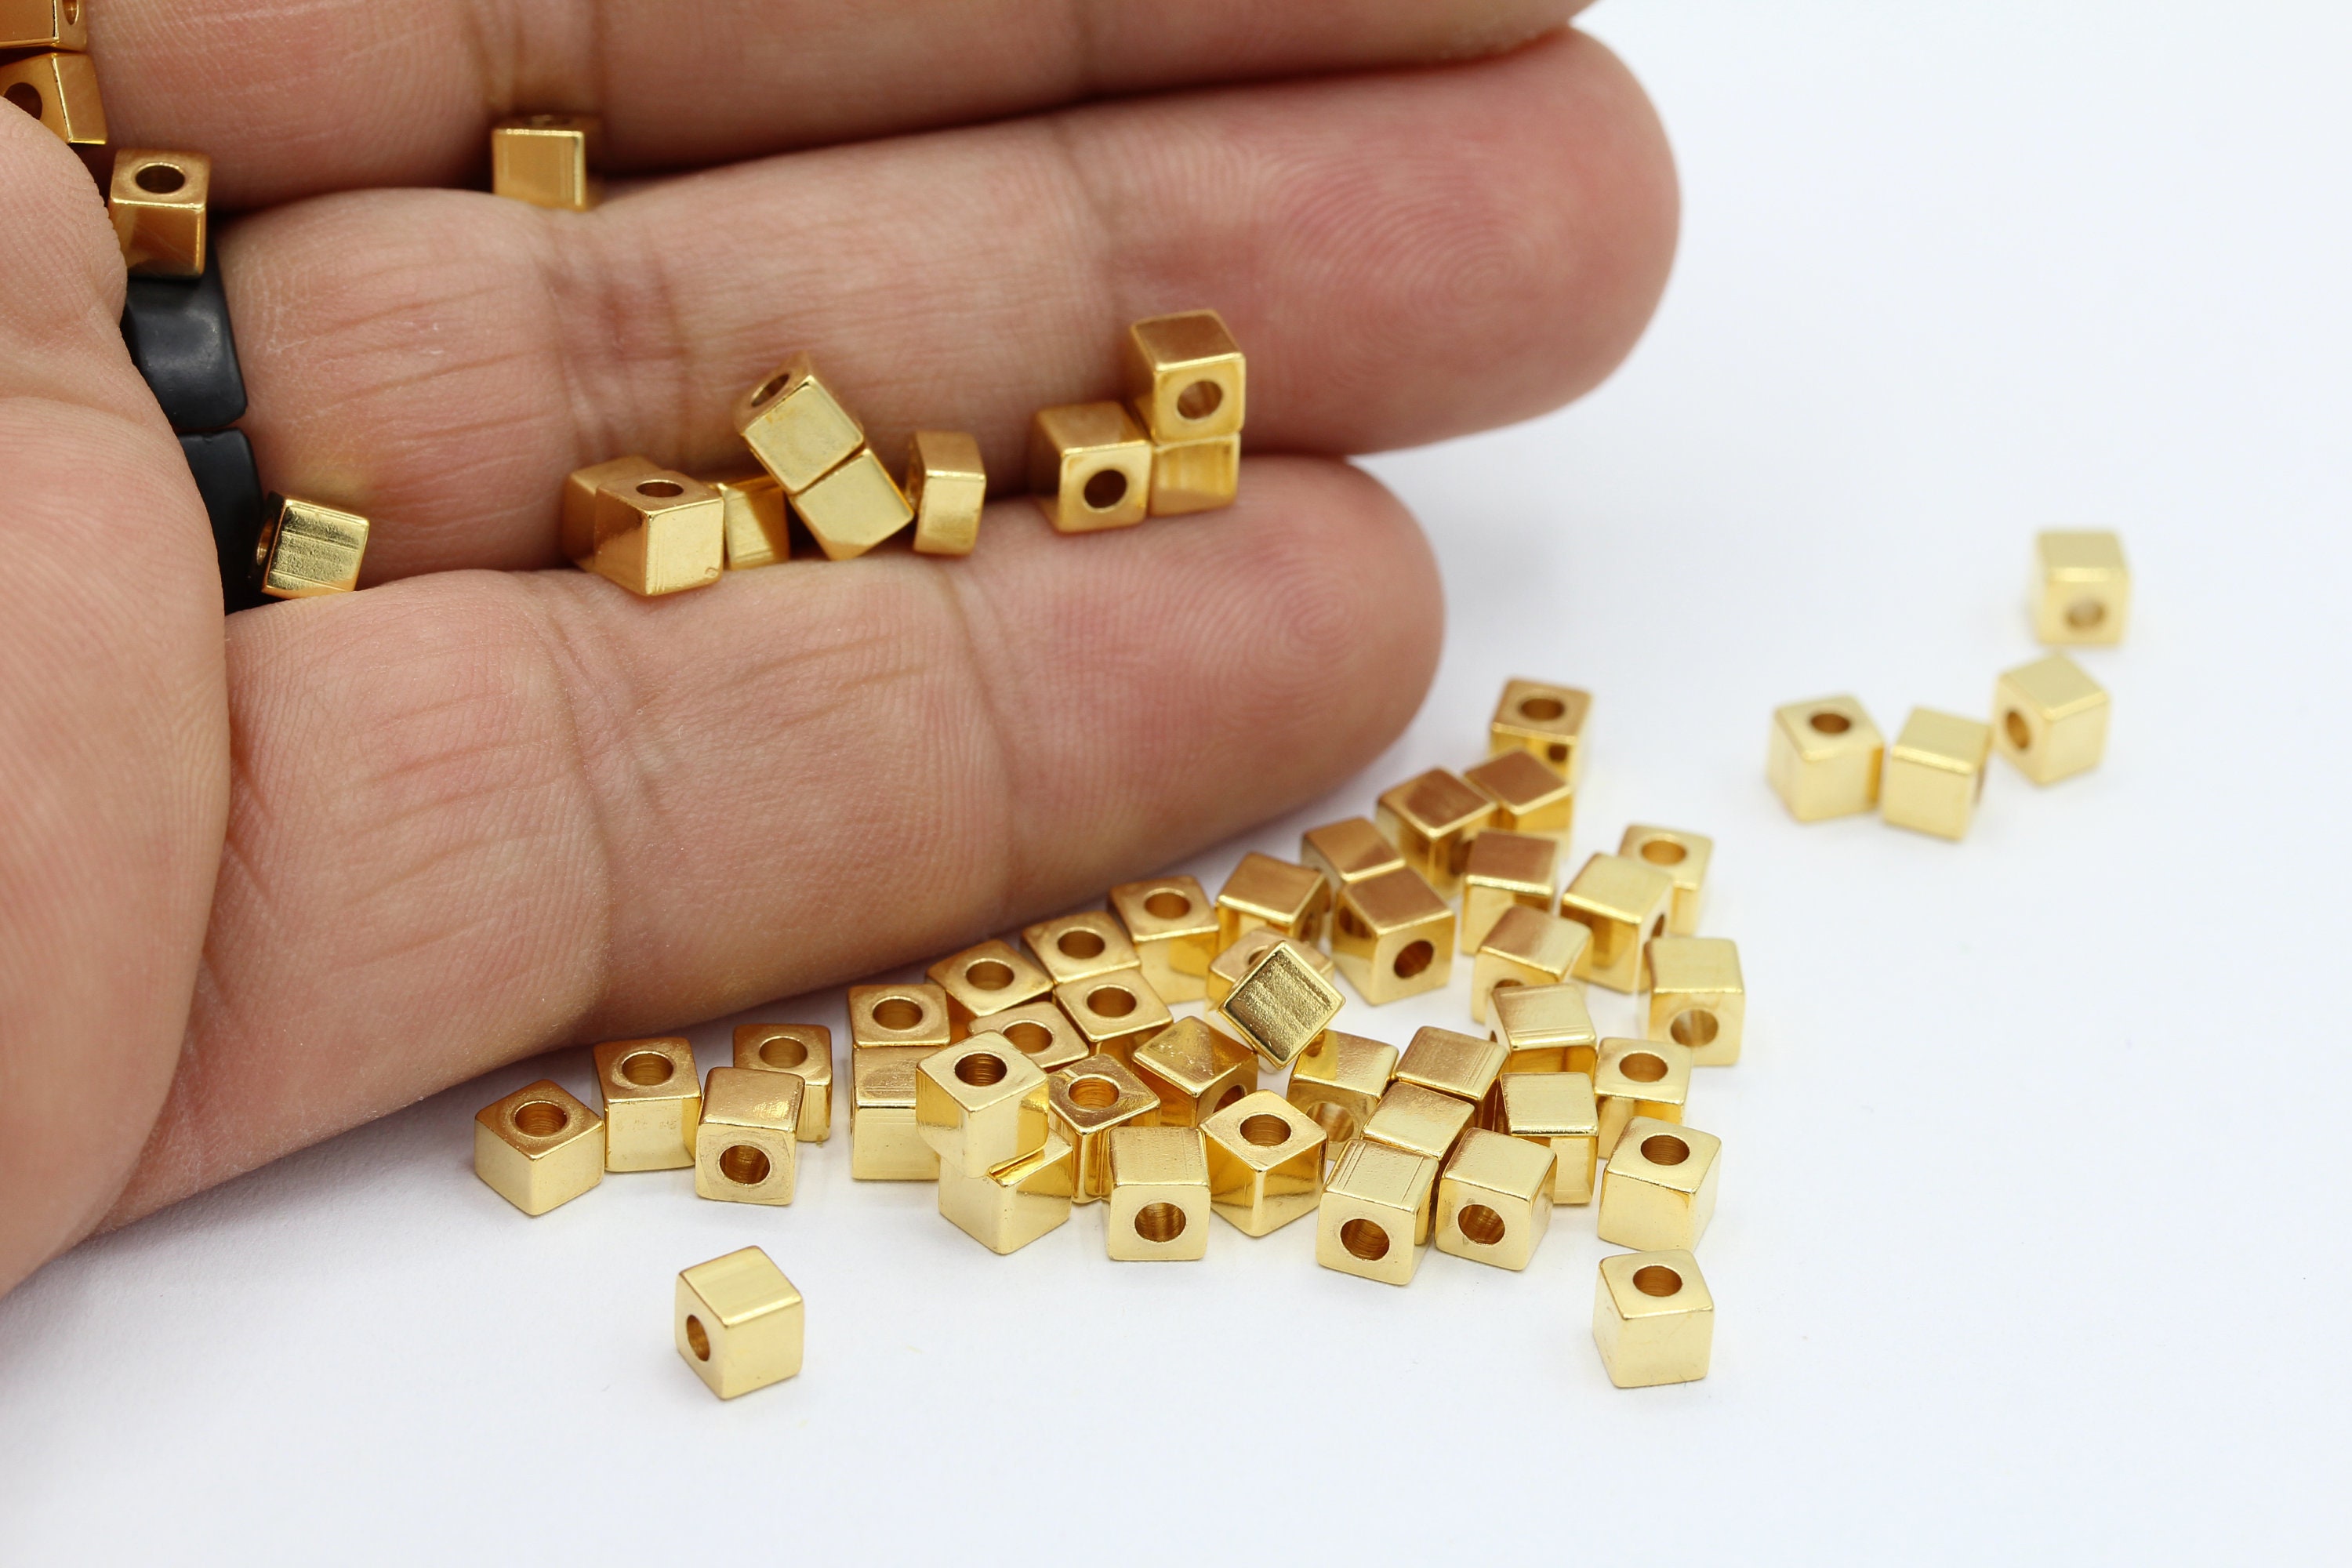 4mm 20pc Gold Barrel Beads / Cylinder Beads / Drum Spacer Beads, 4x4mm  Brushed Gold Beads for Jewelry Making 